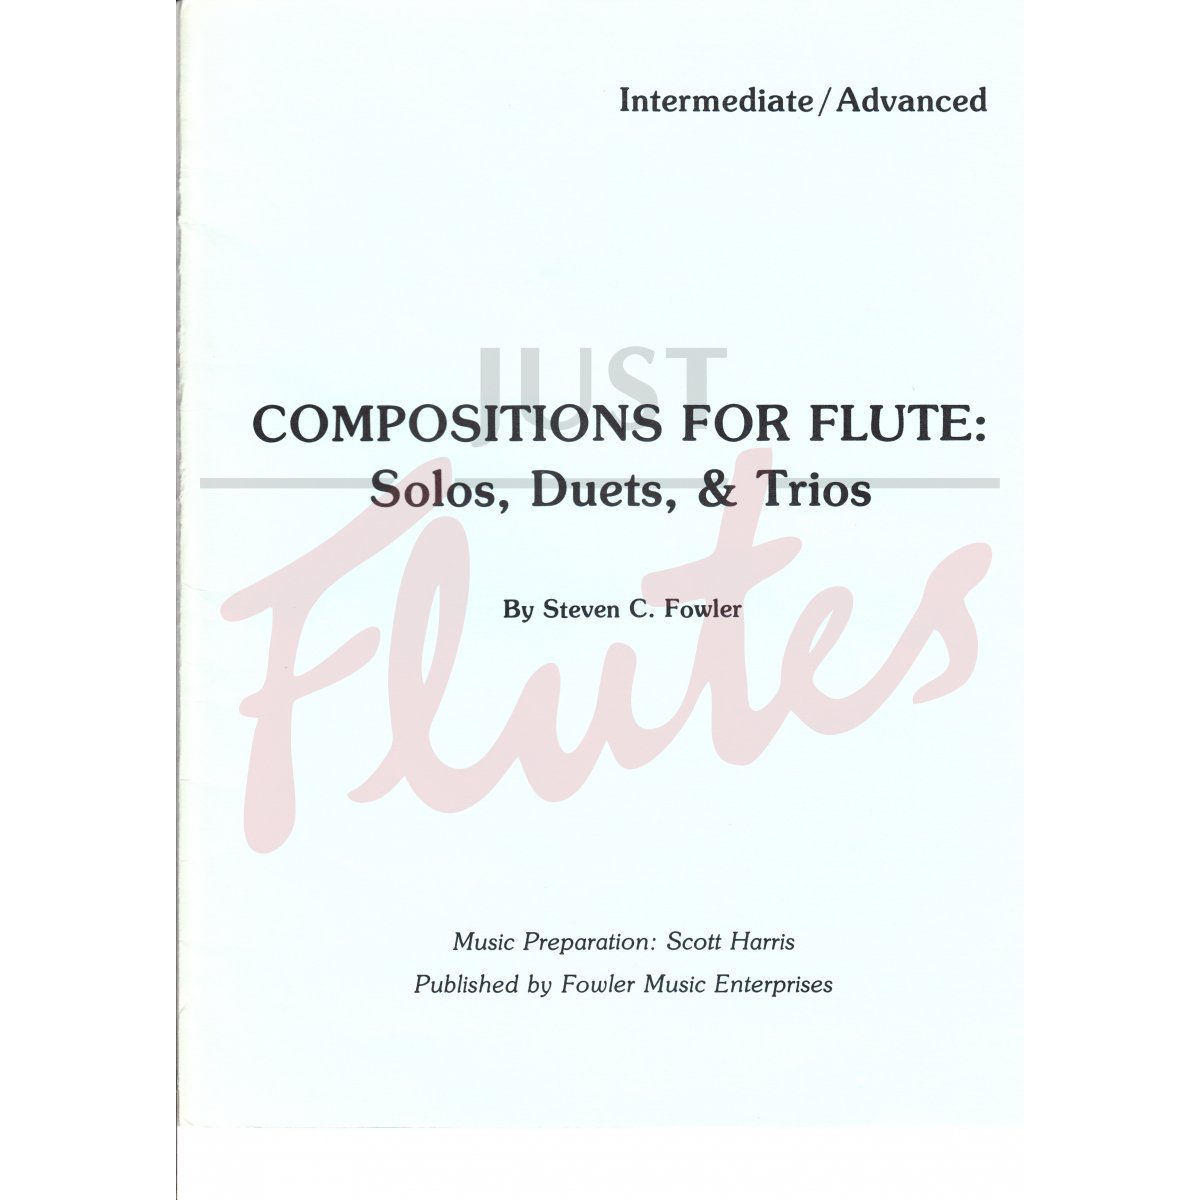 Compositions for Flute: Solos, Duets and Trios